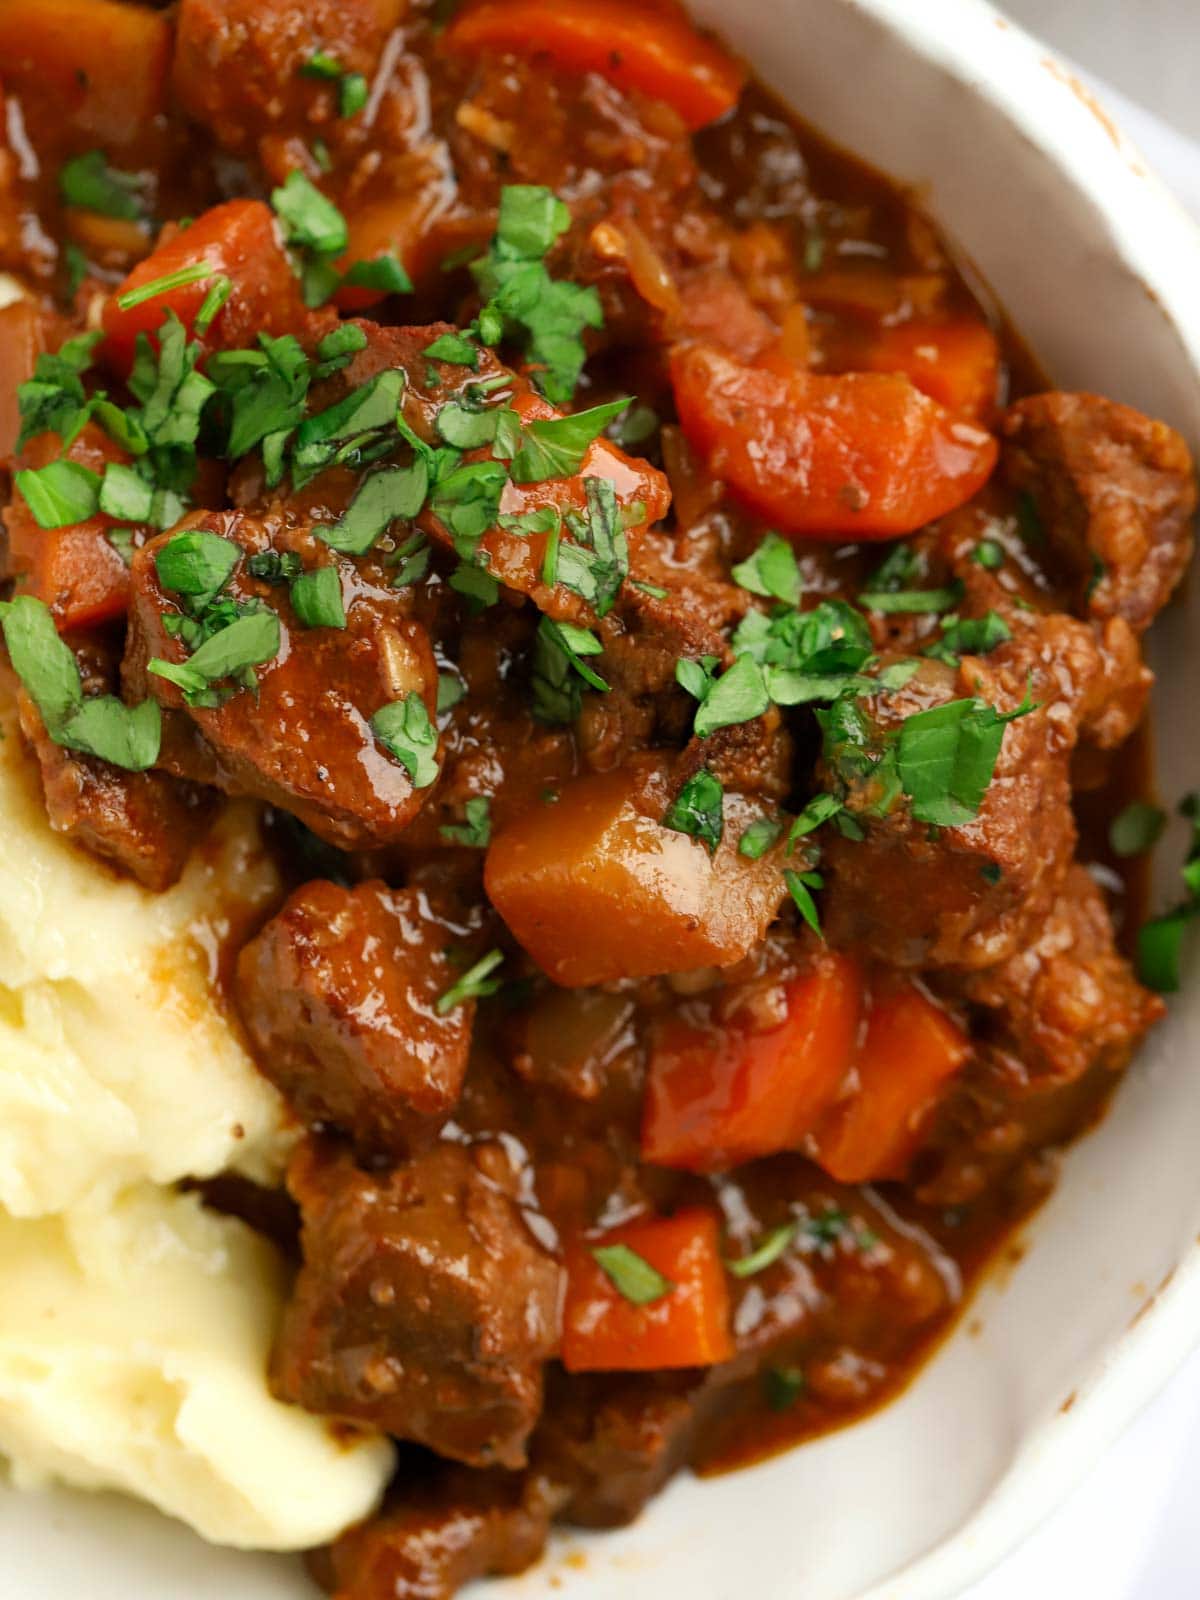 Meat casserole with carrots and gravy in a bowl with mashed potatoes